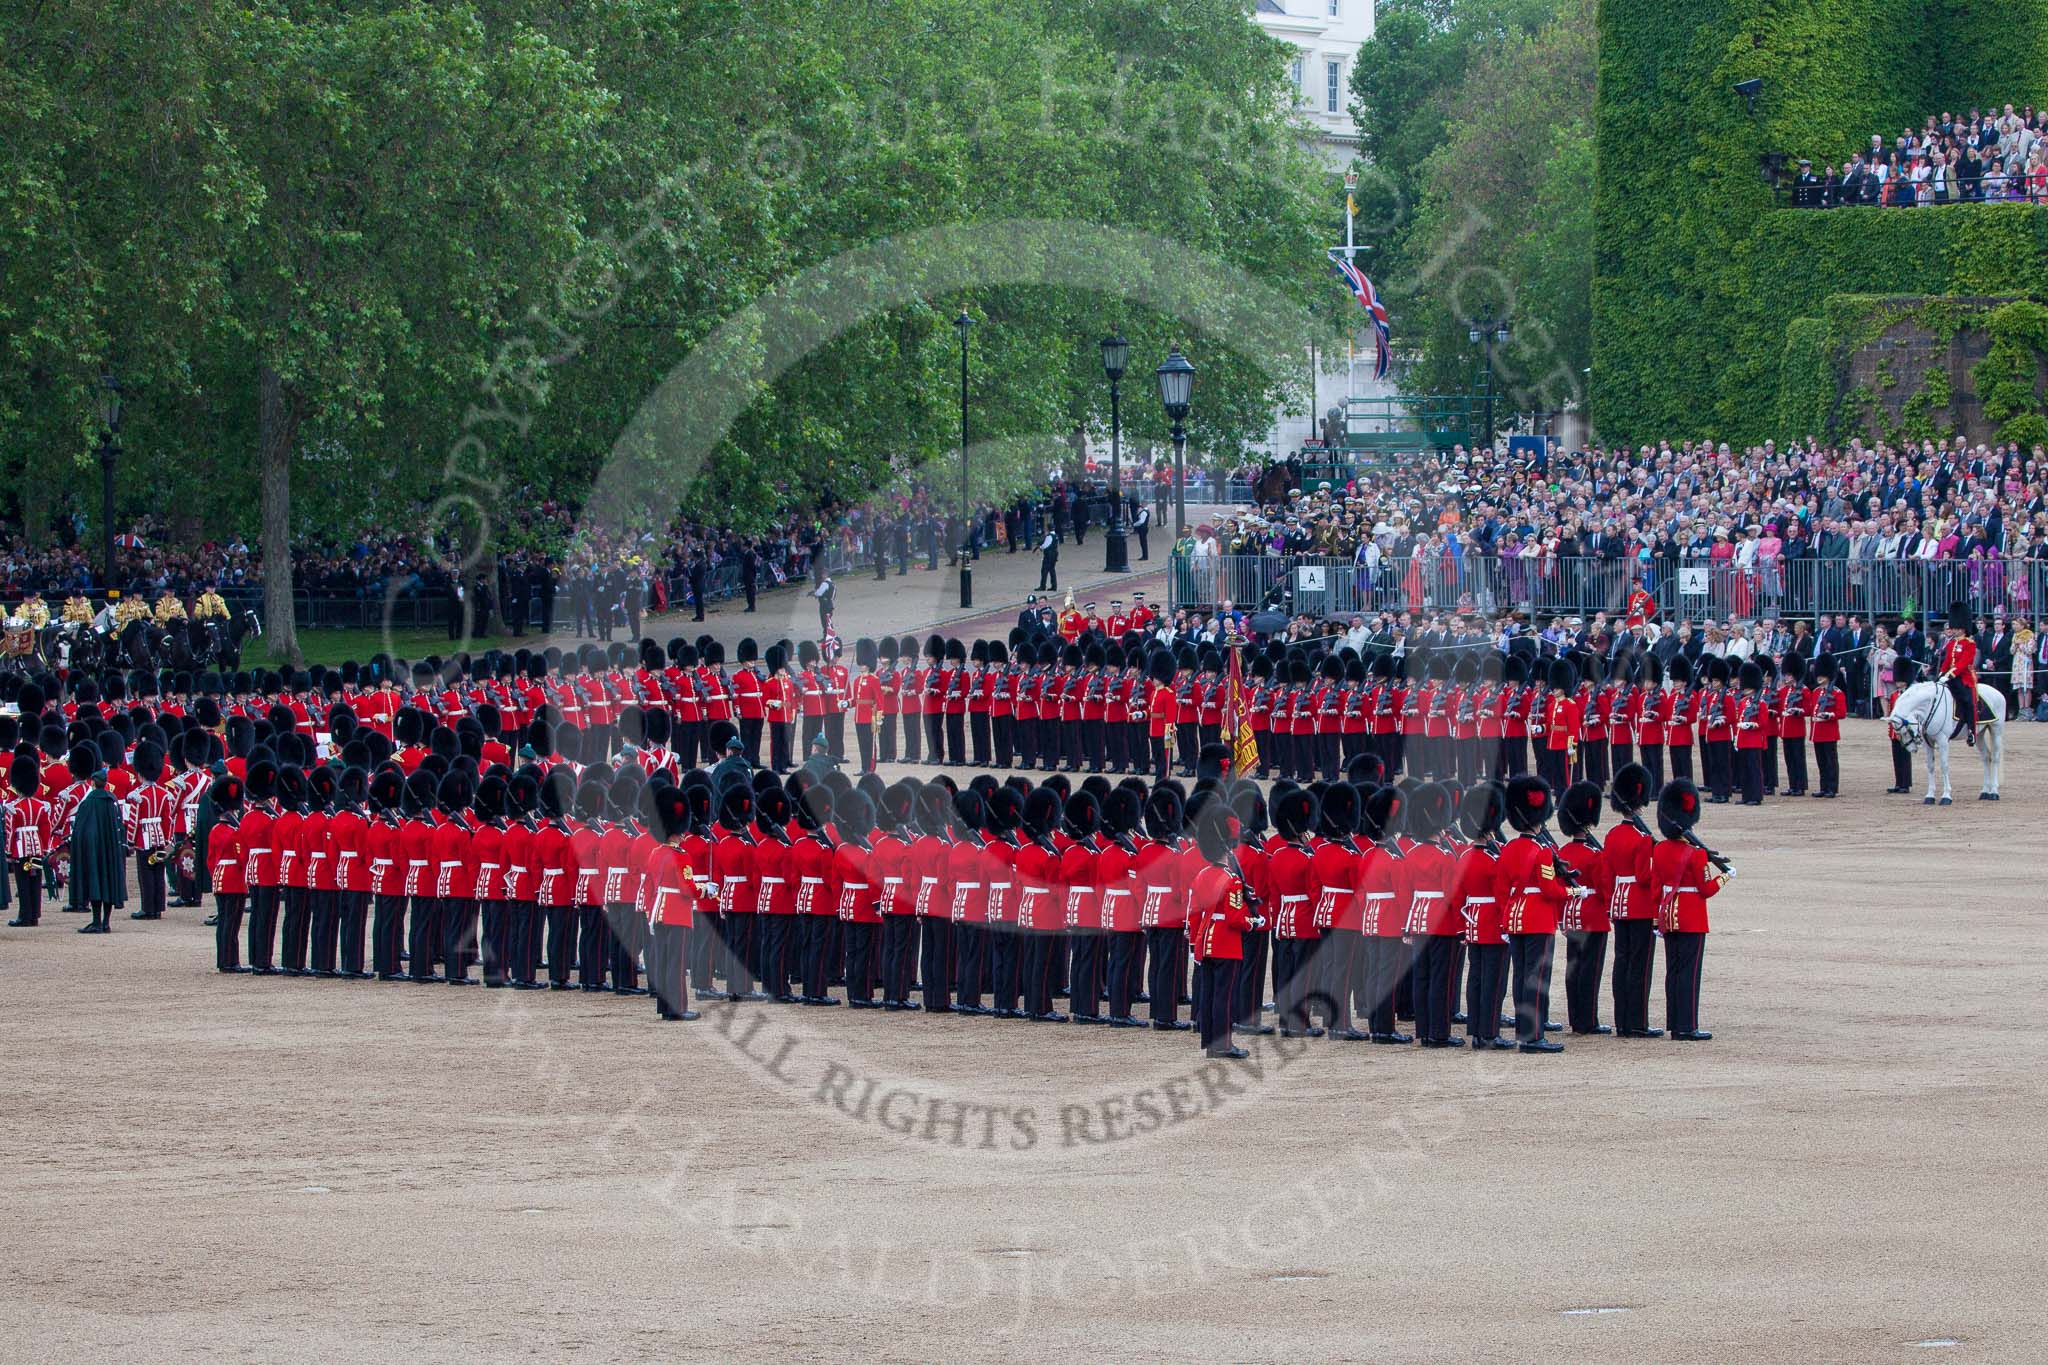 Trooping the Colour 2012: To quote the official programme: "With the Ensign and Colour at the front, the Escort slow marches towards No. 6 Guard so that it is ready to Troop The Colour.".
Horse Guards Parade, Westminster,
London SW1,

United Kingdom,
on 16 June 2012 at 11:23, image #323